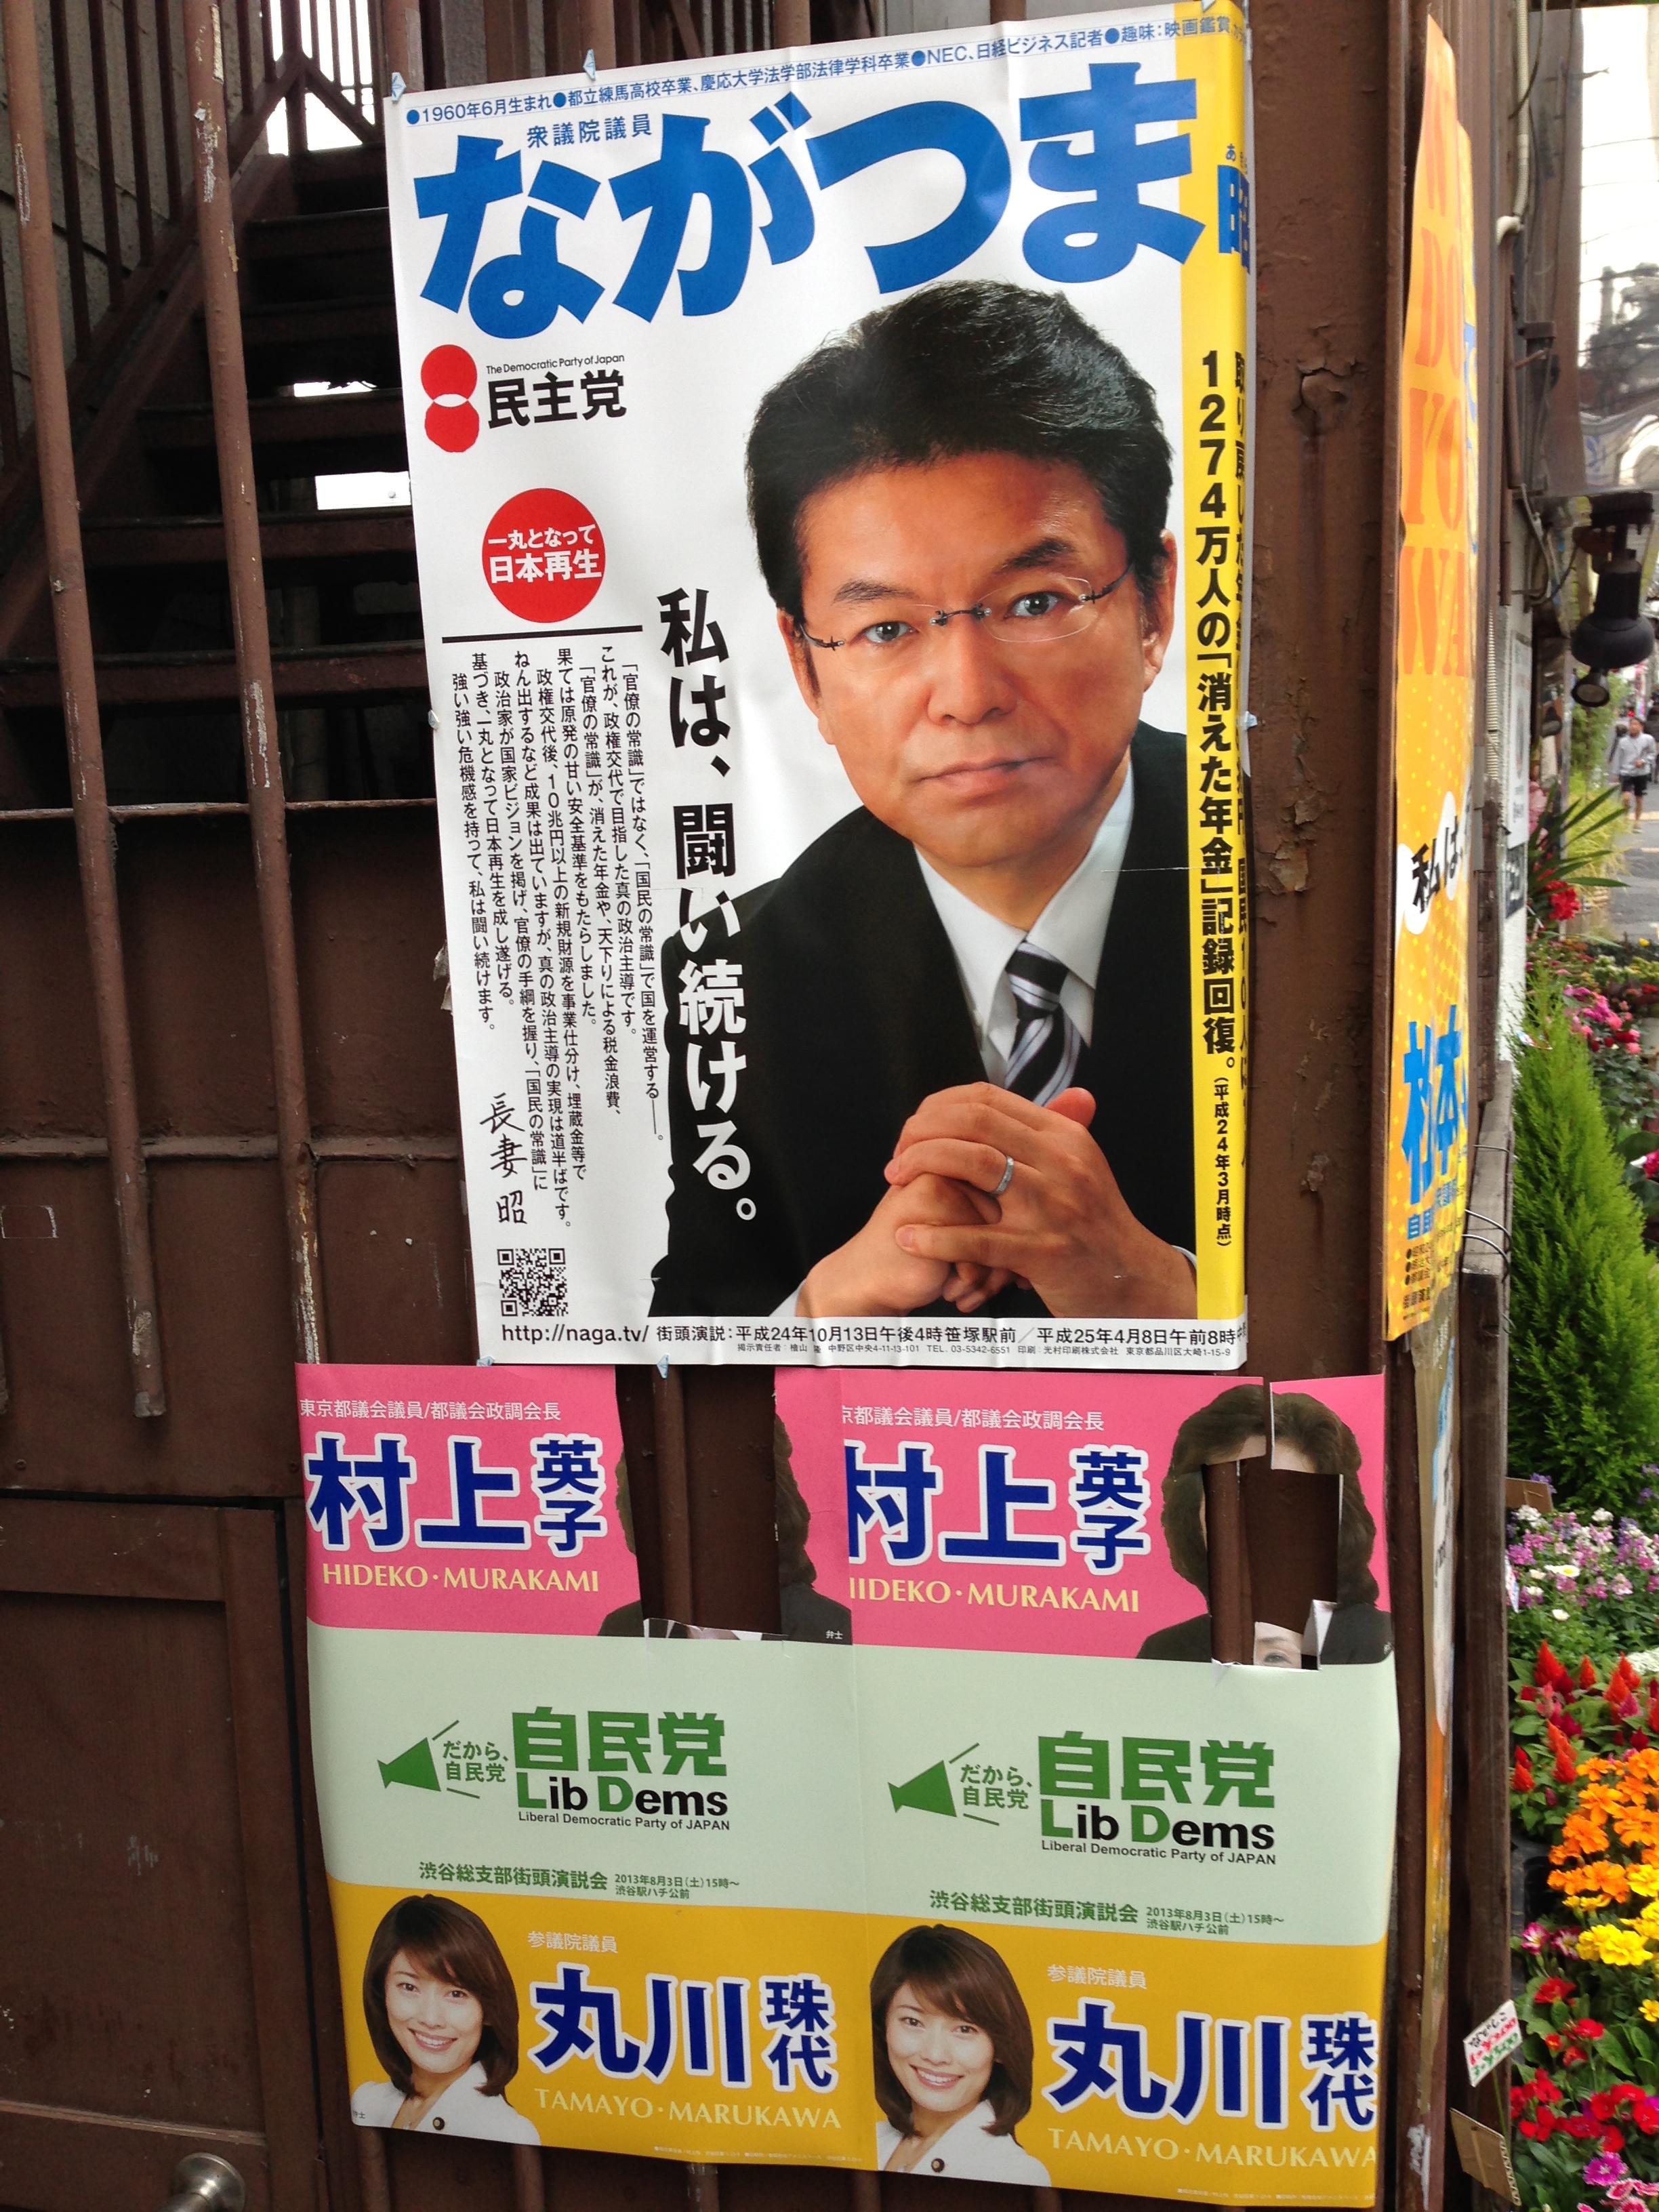 There seemed to be an election going on.  This is a selection of campaign posters.